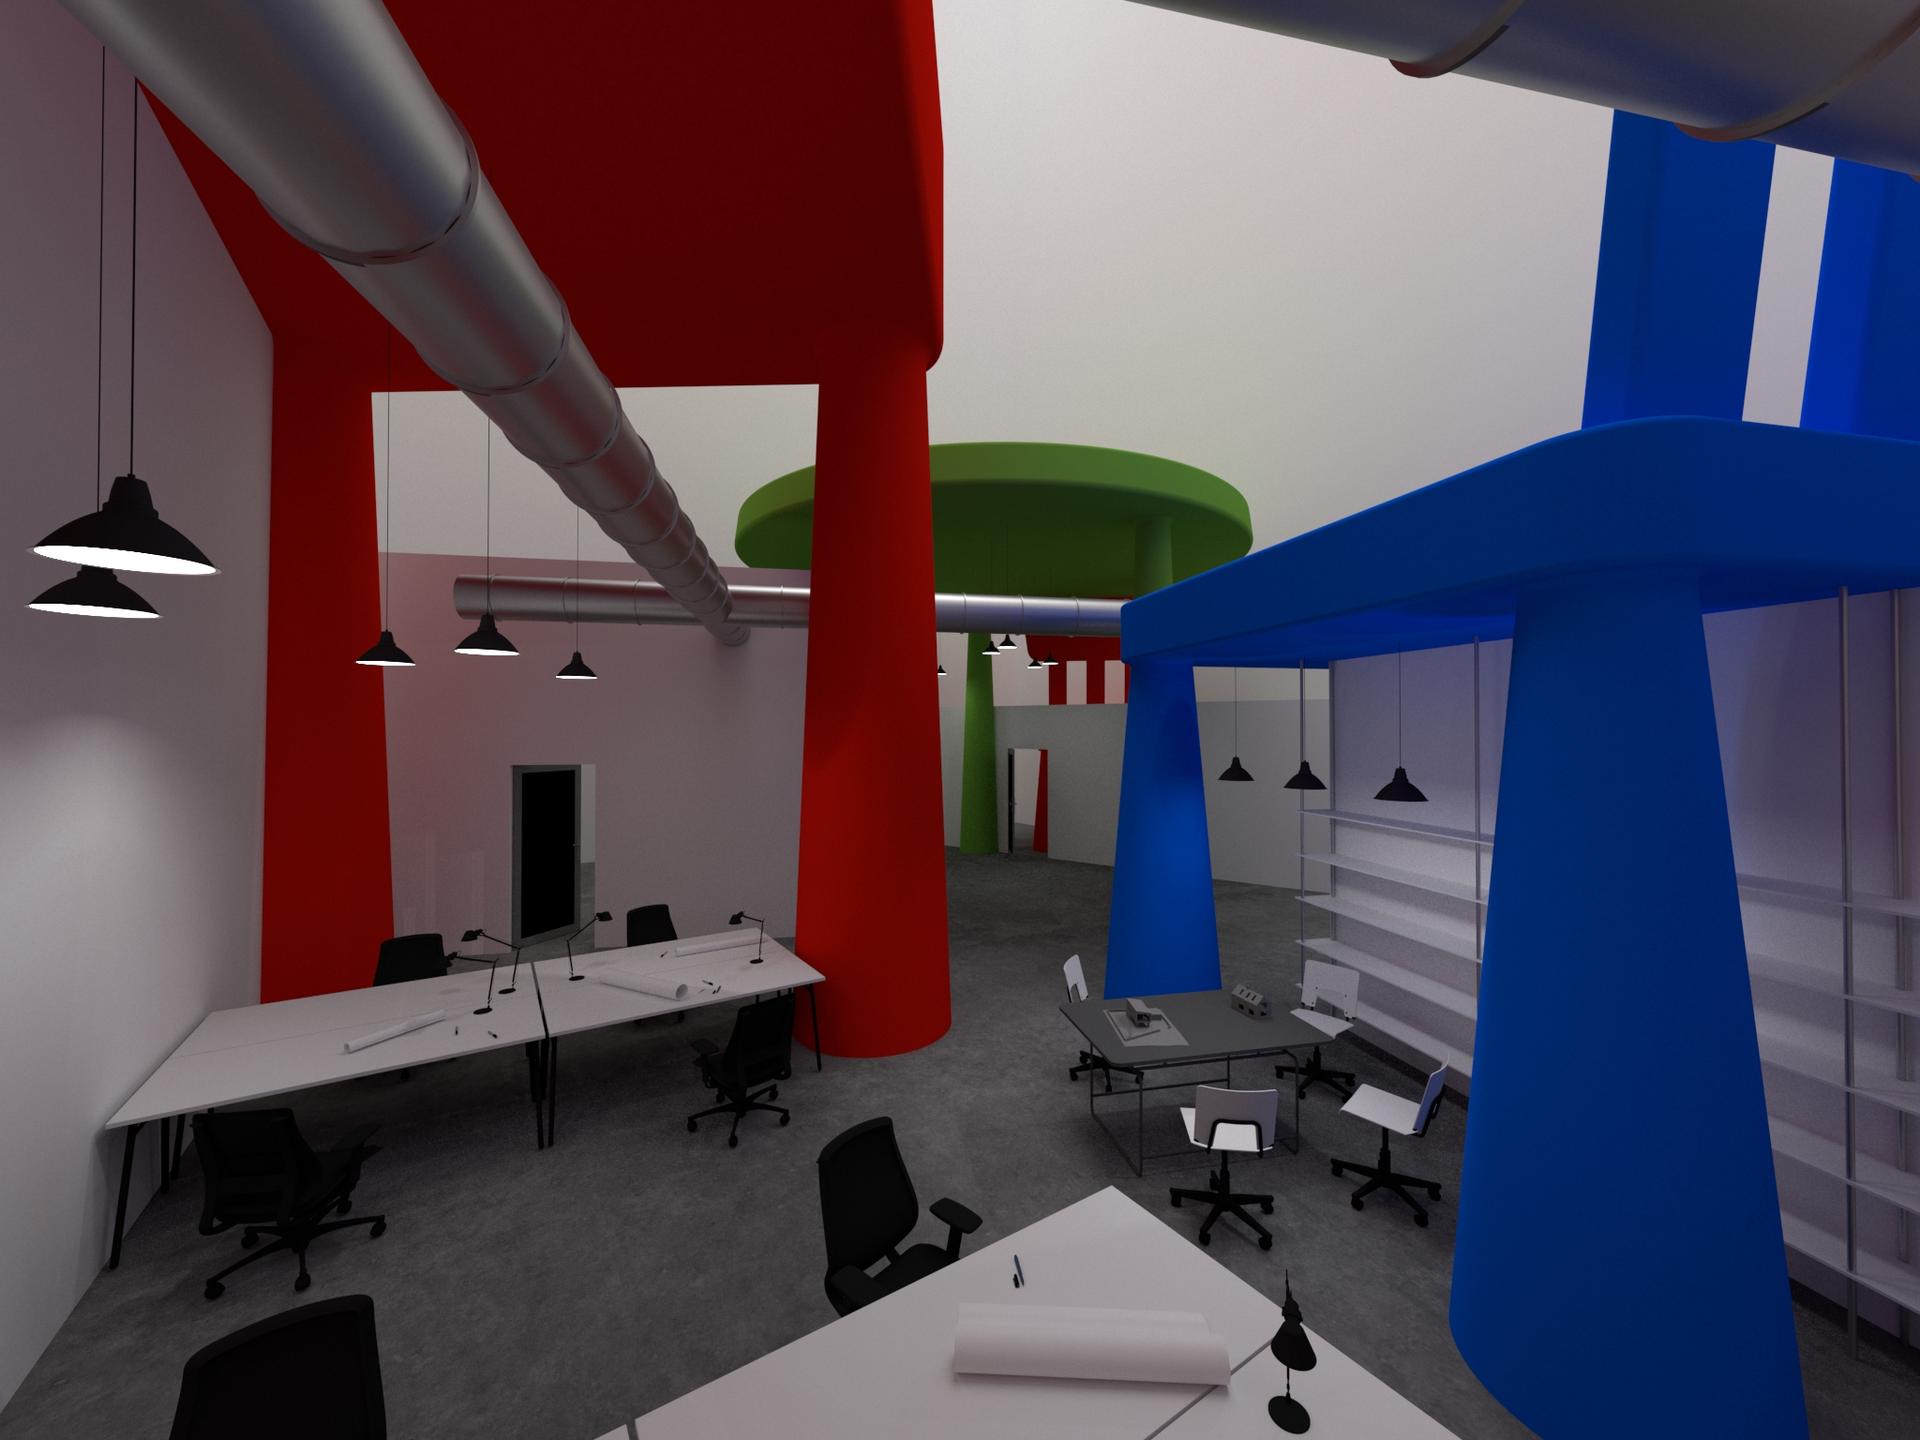  A rendering of an office space with oversized, out of place children's furniture.  